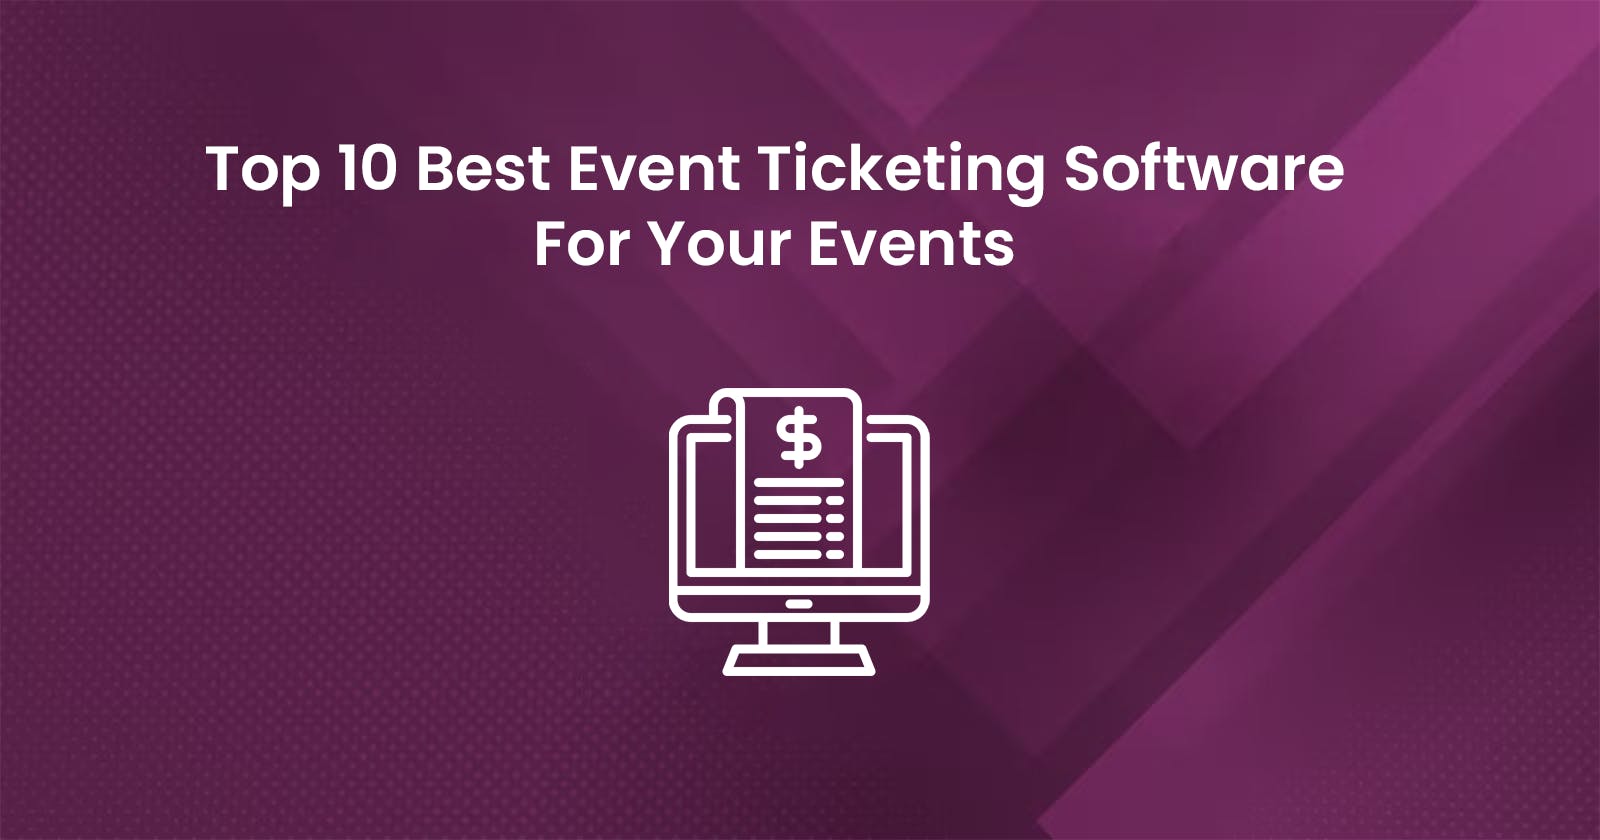 Top 10 Best Event Ticketing Software For Your Events